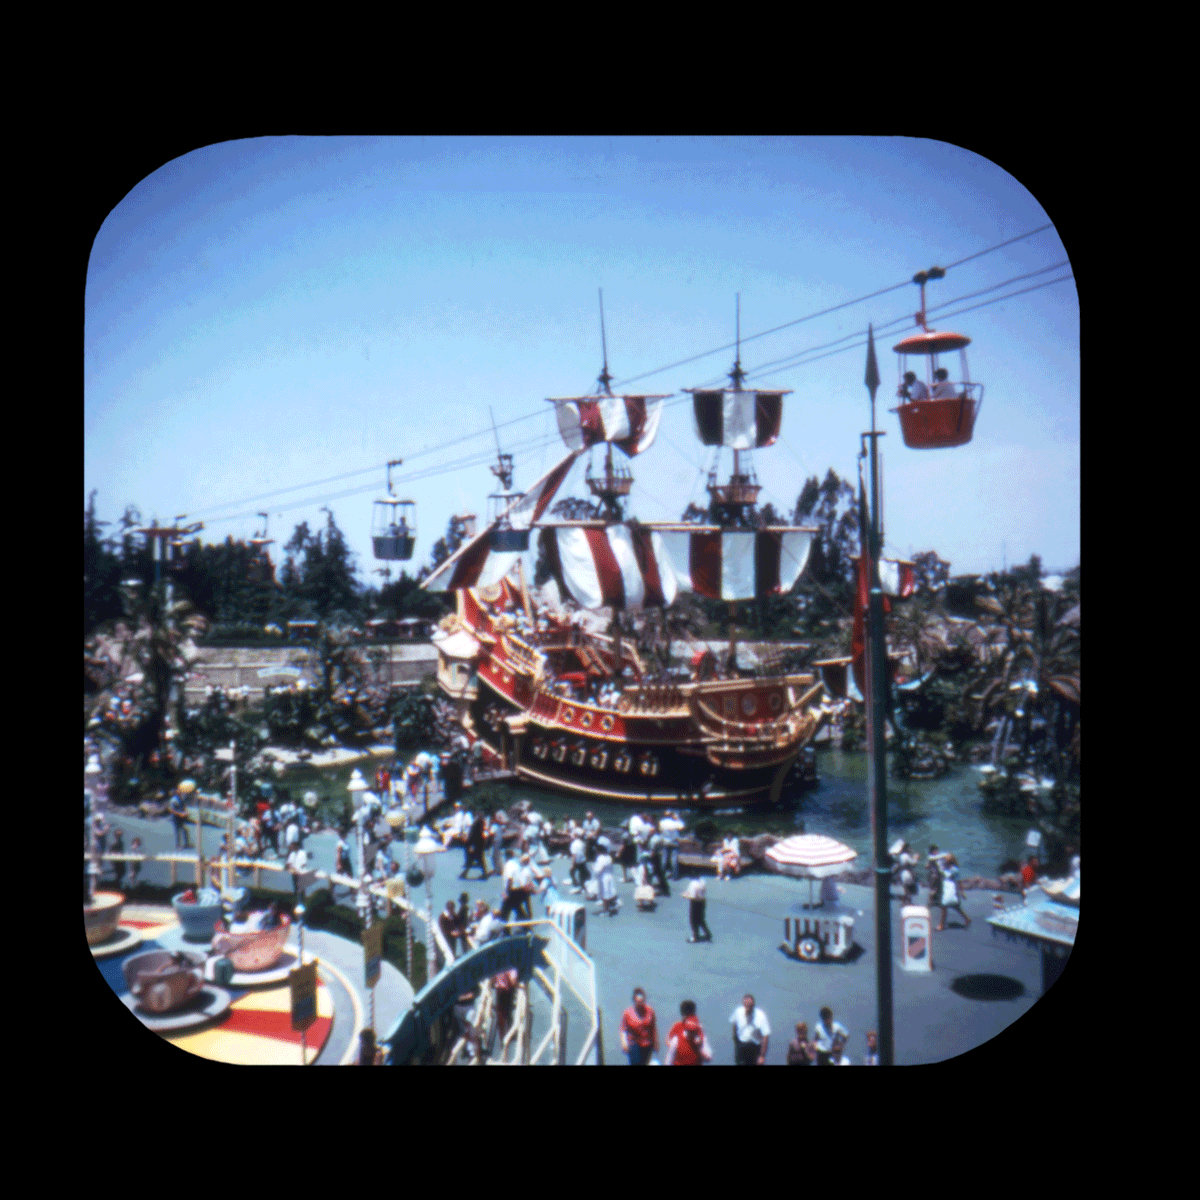 The Vintage View-Master - Caption: SKY RIDERS SOAR ABOVE PIRATE SHIP  Brand